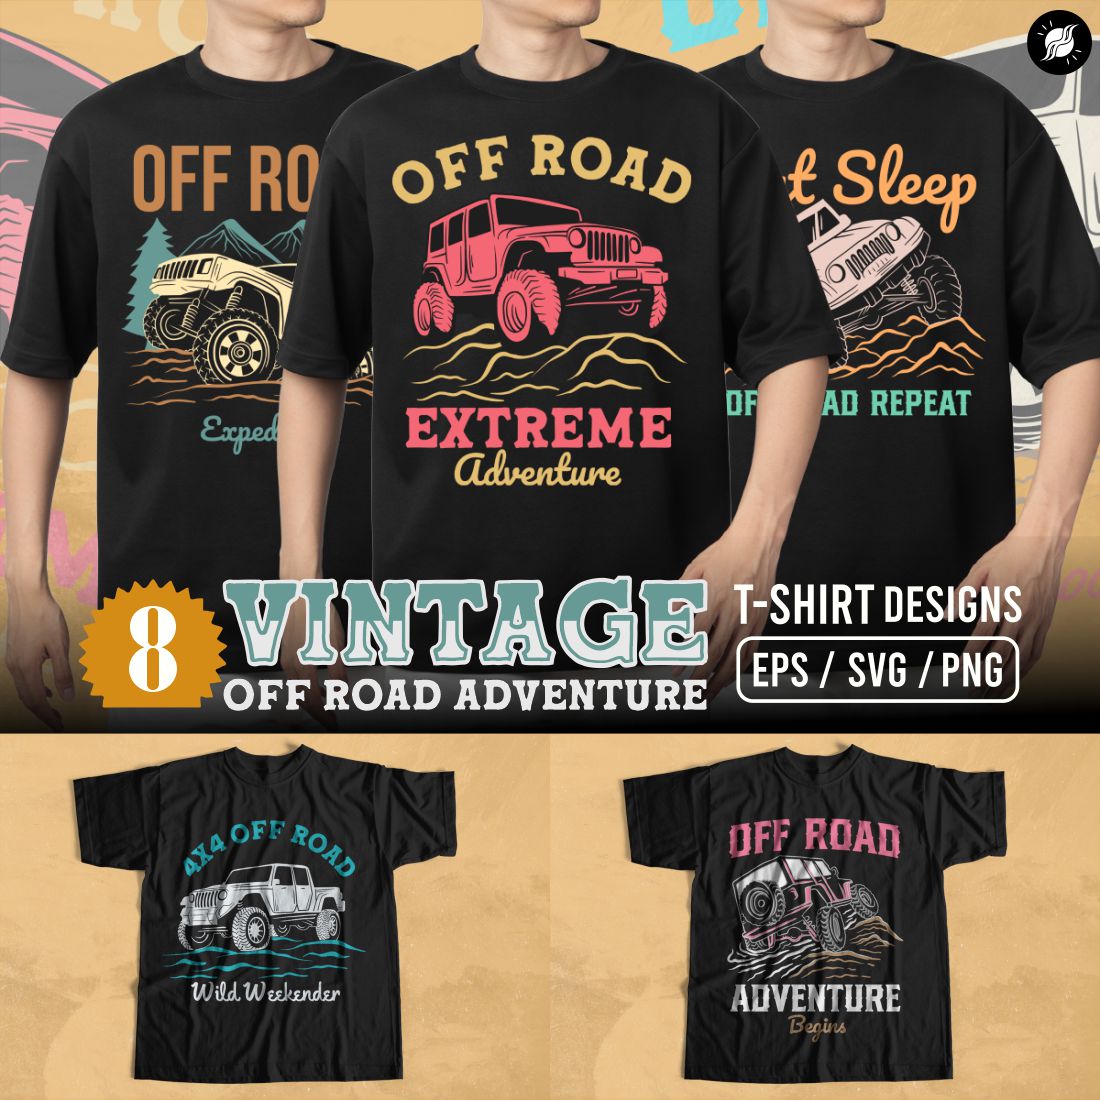 Vintage Off Road Adventure T-shirt Designs Vector Bundle, Off Road Expedition Graphic T-shirt for Club Community cover image.